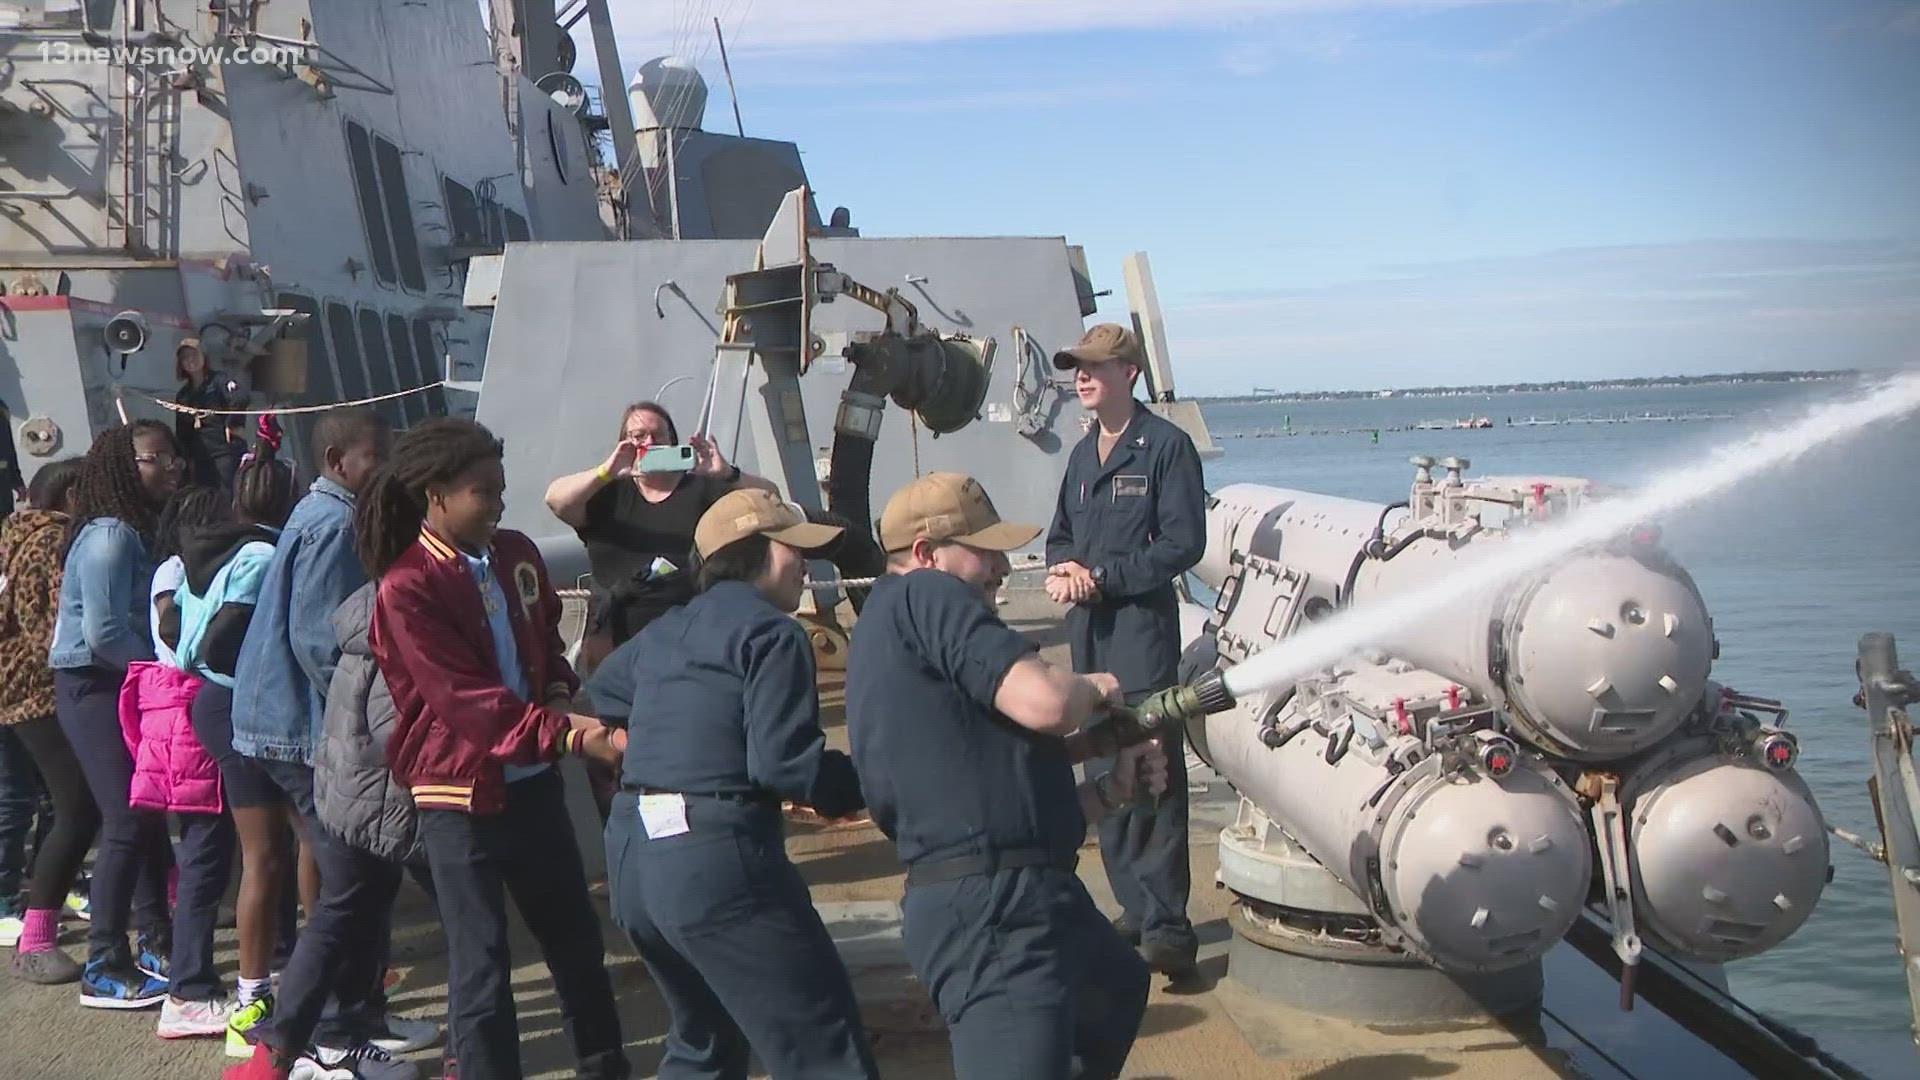 Nearly 3,000 students got to explore warships, aircraft displays and exhibits.